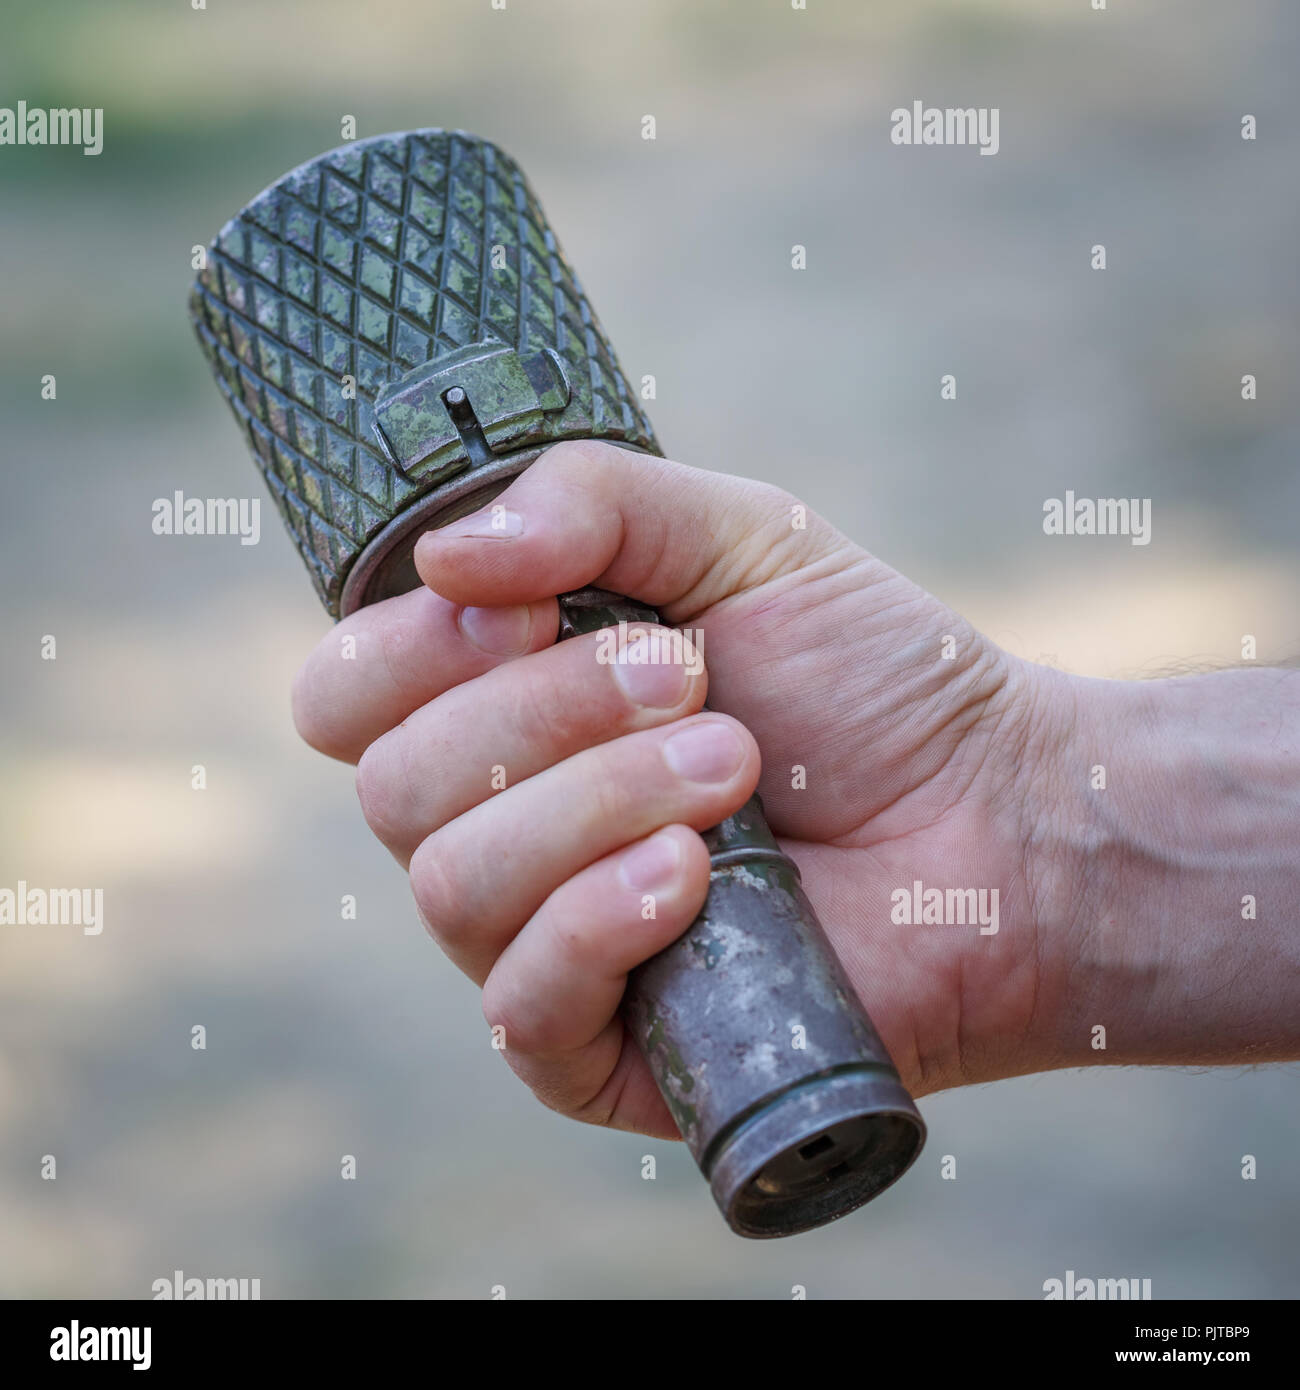 Antitank grenade in the male hand close-up Stock Photo